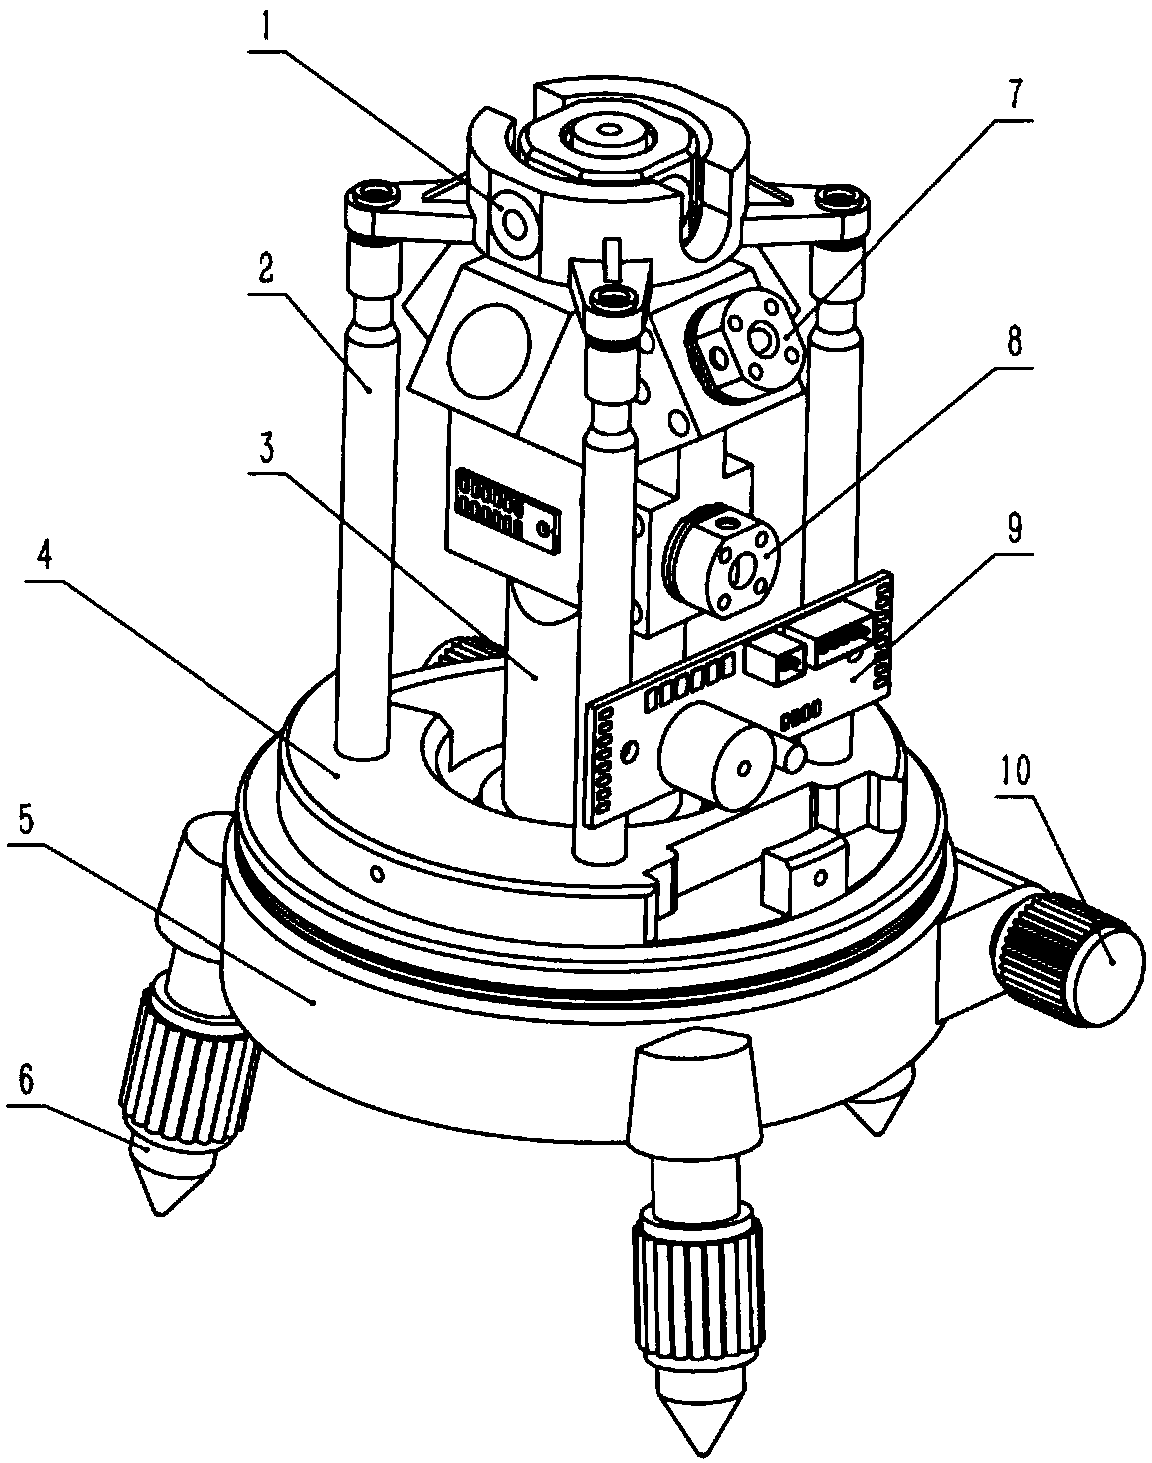 Inspection and adjustment device for cross-shaped laser measuring instruments